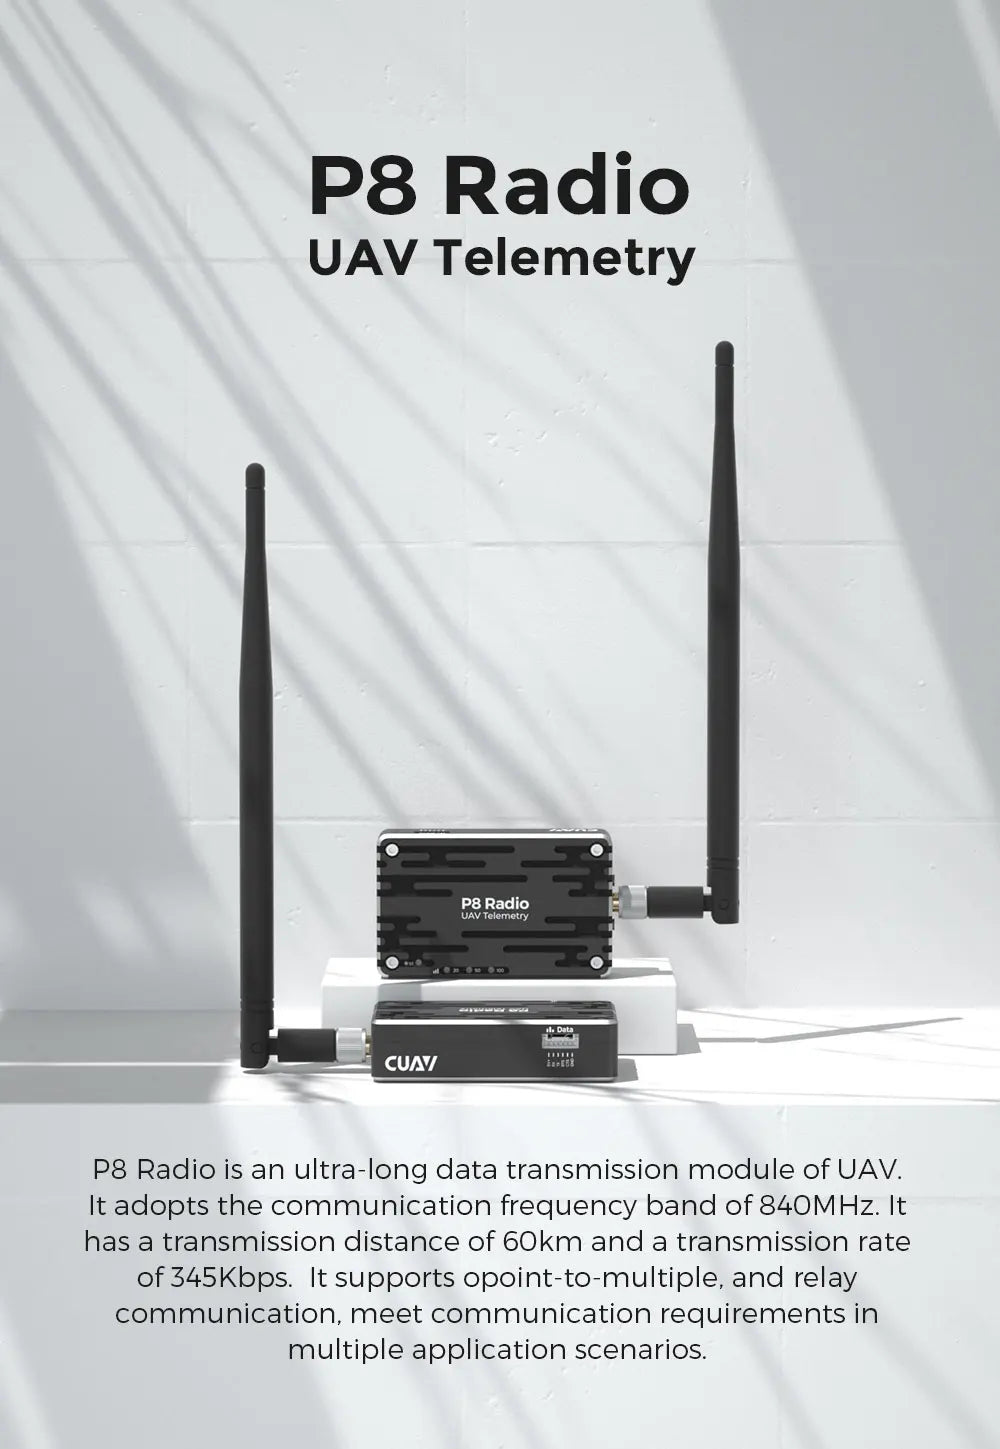 CUAV UAV P8 Radio Telemetry, CUNV P8 Radio supports opoint-to-multiple, and relay communication